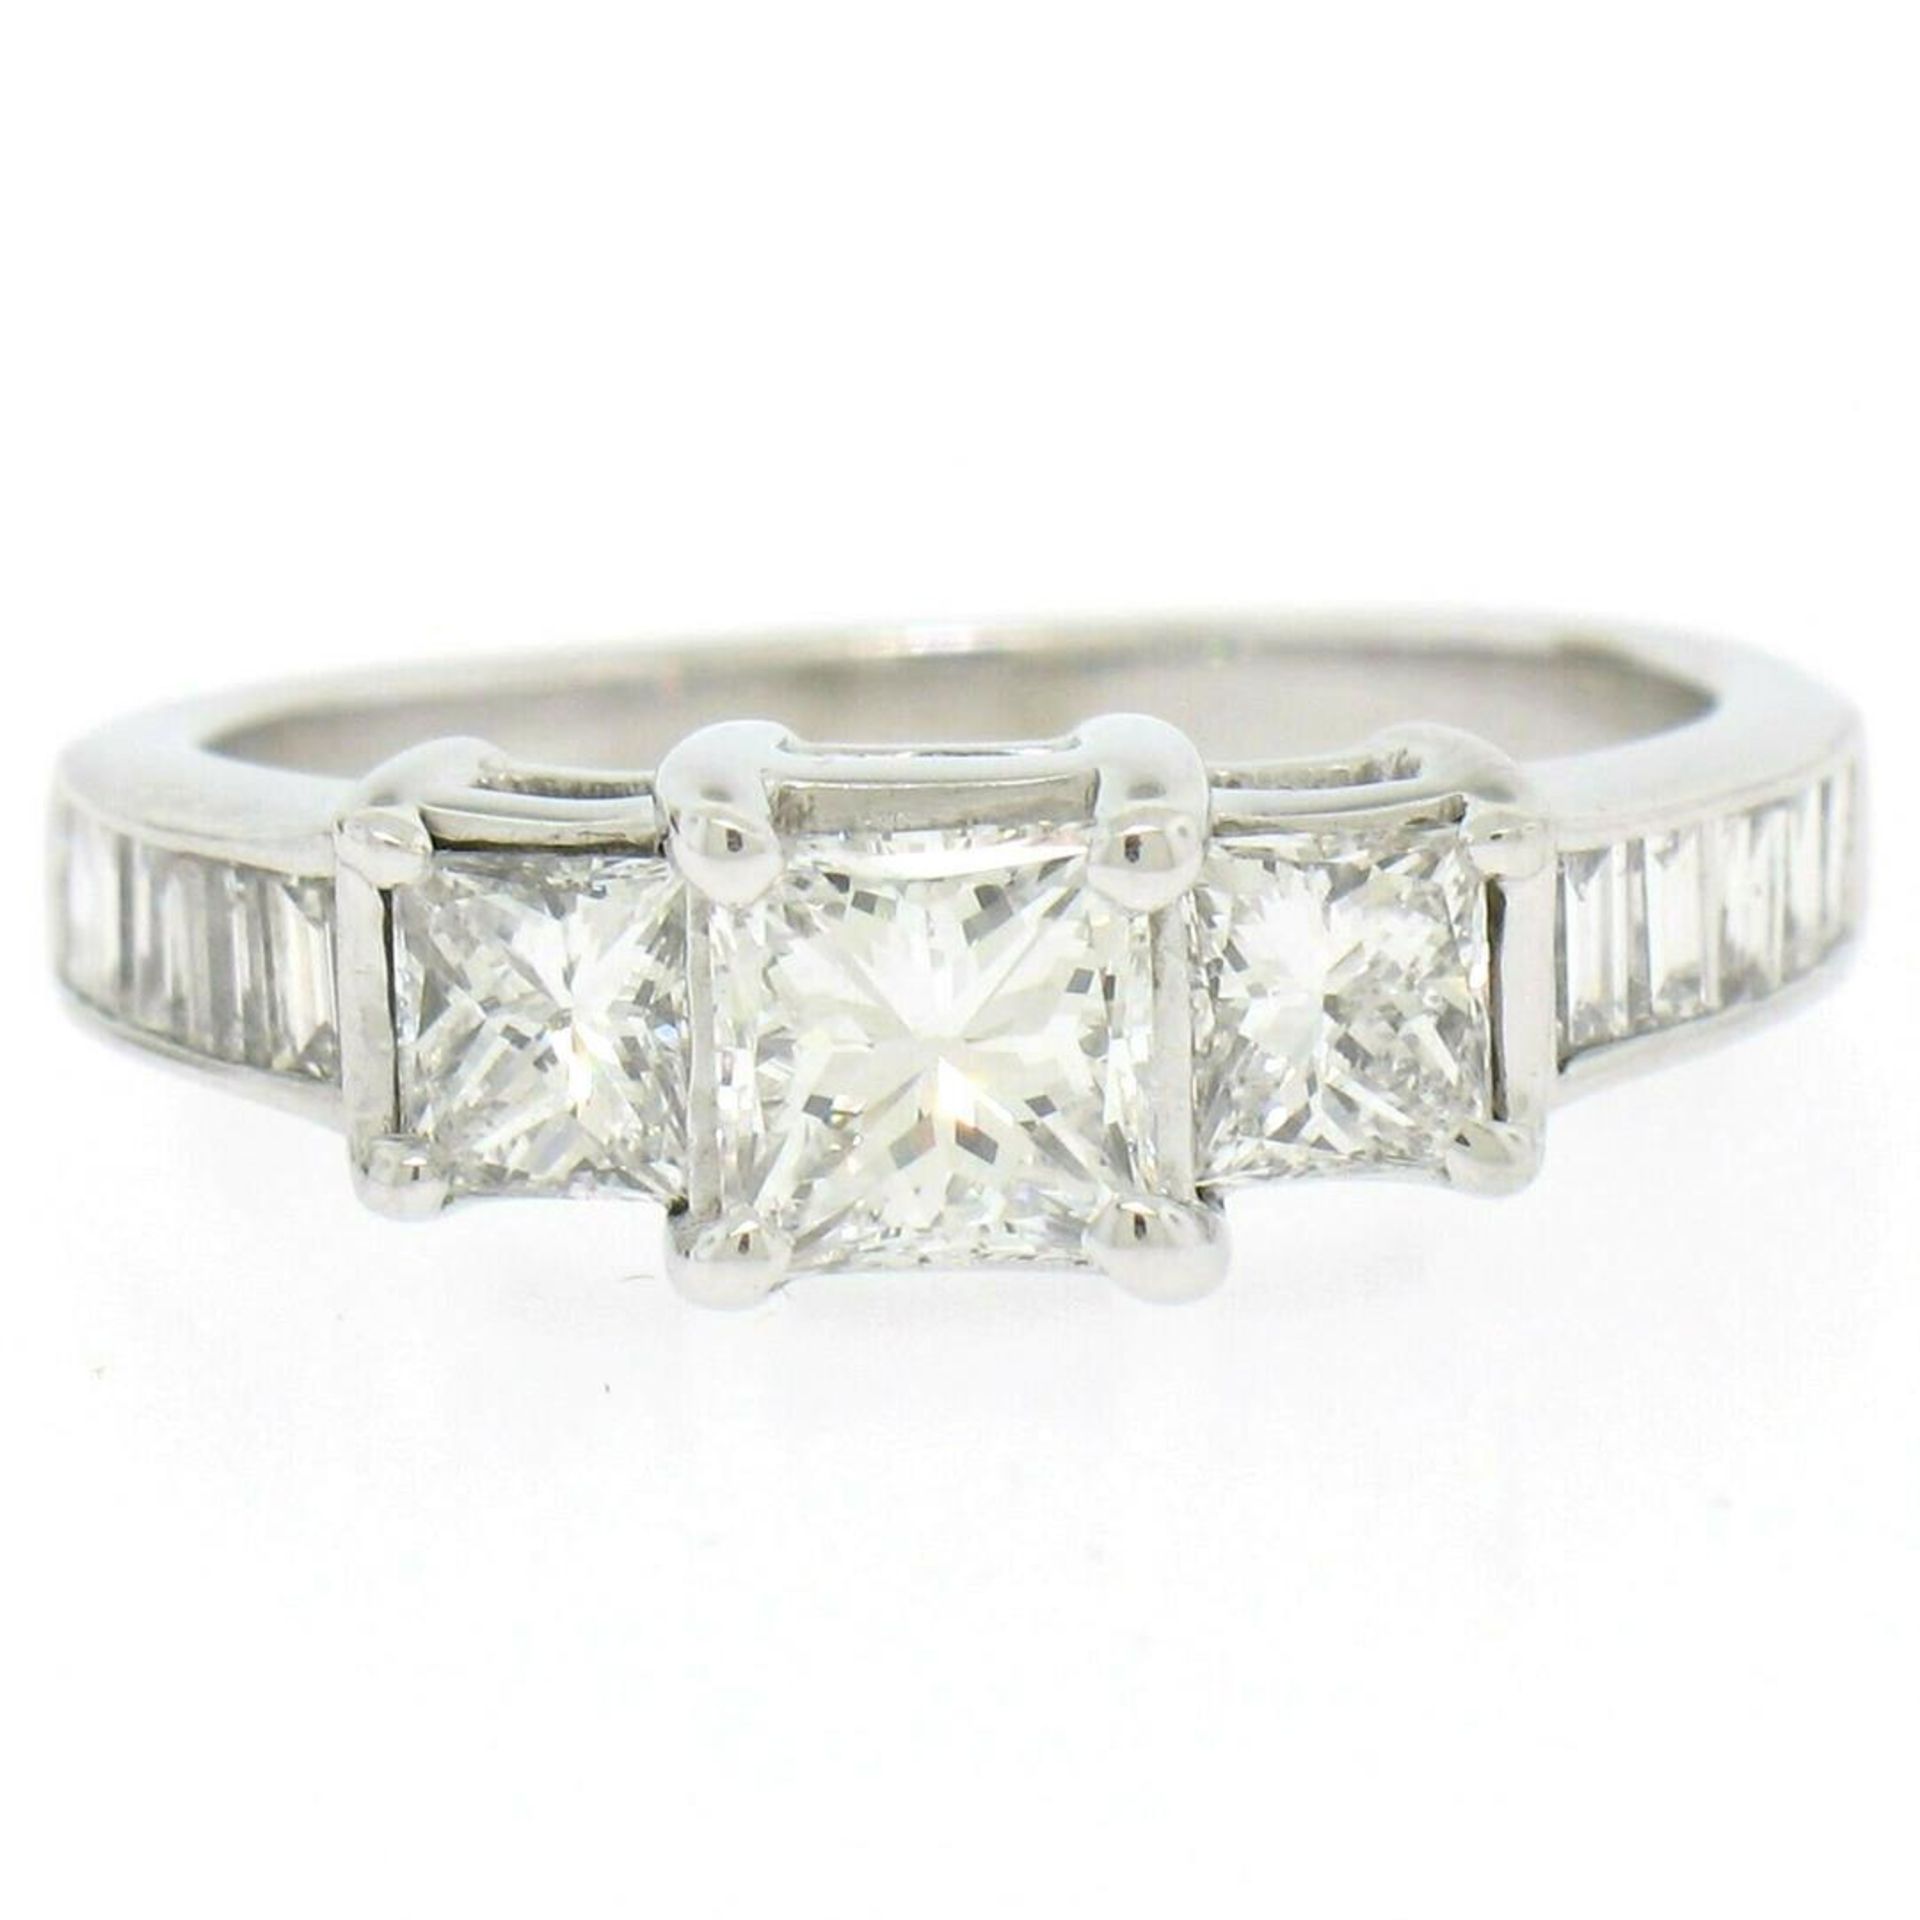 14k White Gold 1.45 ctw 3 Princess Diamond Engagement Ring w/ Baguette Accents - Image 16 of 18